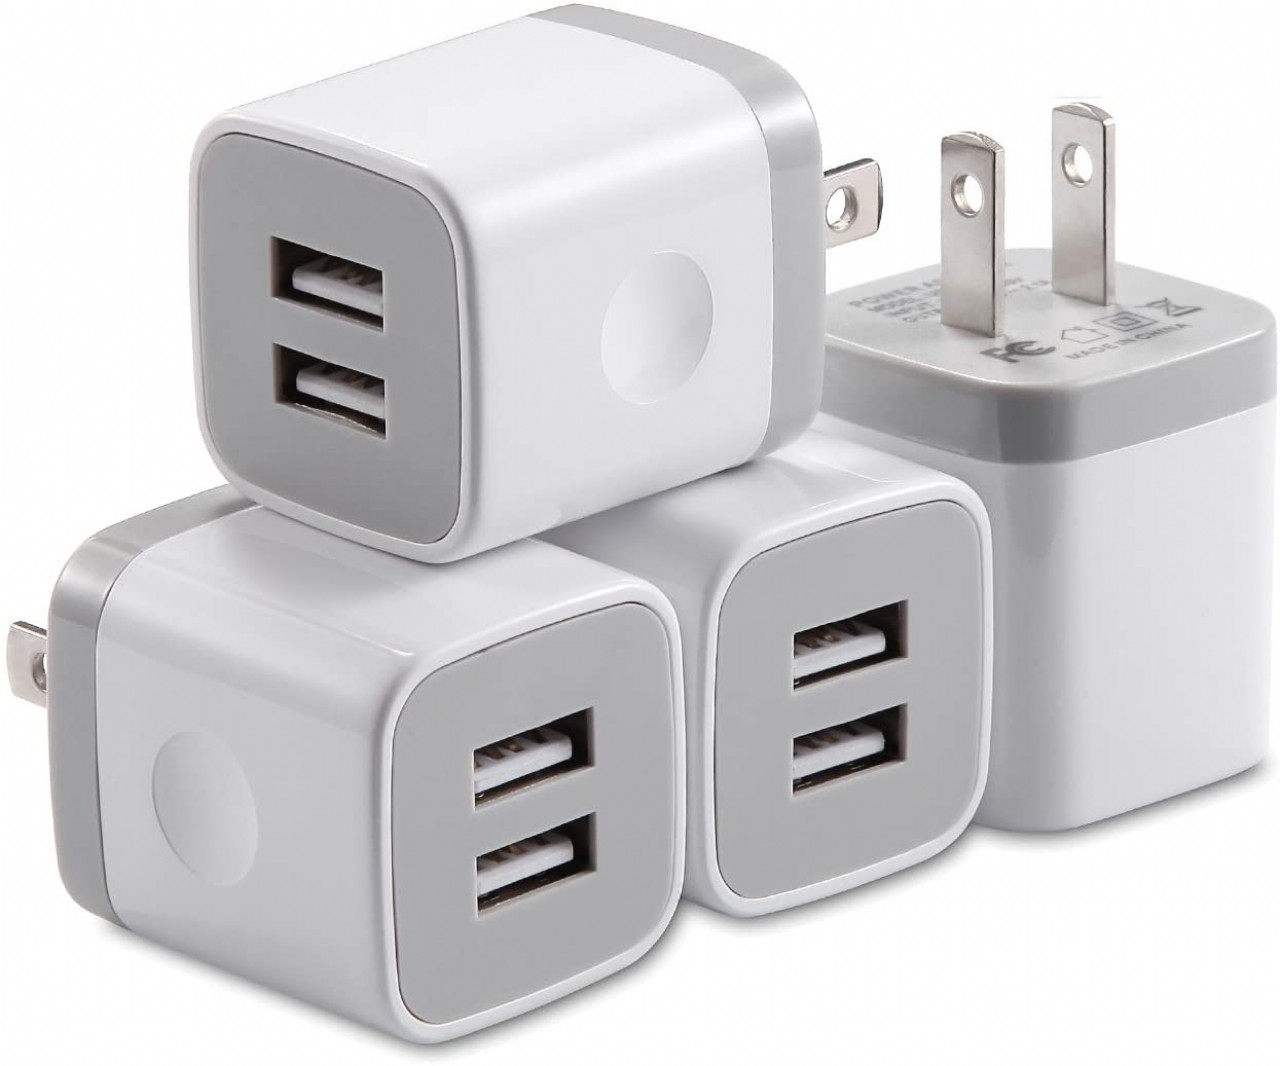 USB Wall Charger,4-Pack 2.1A Dual Port USB Cube Power Adapter Wall Charger Plug Charging Block Cube